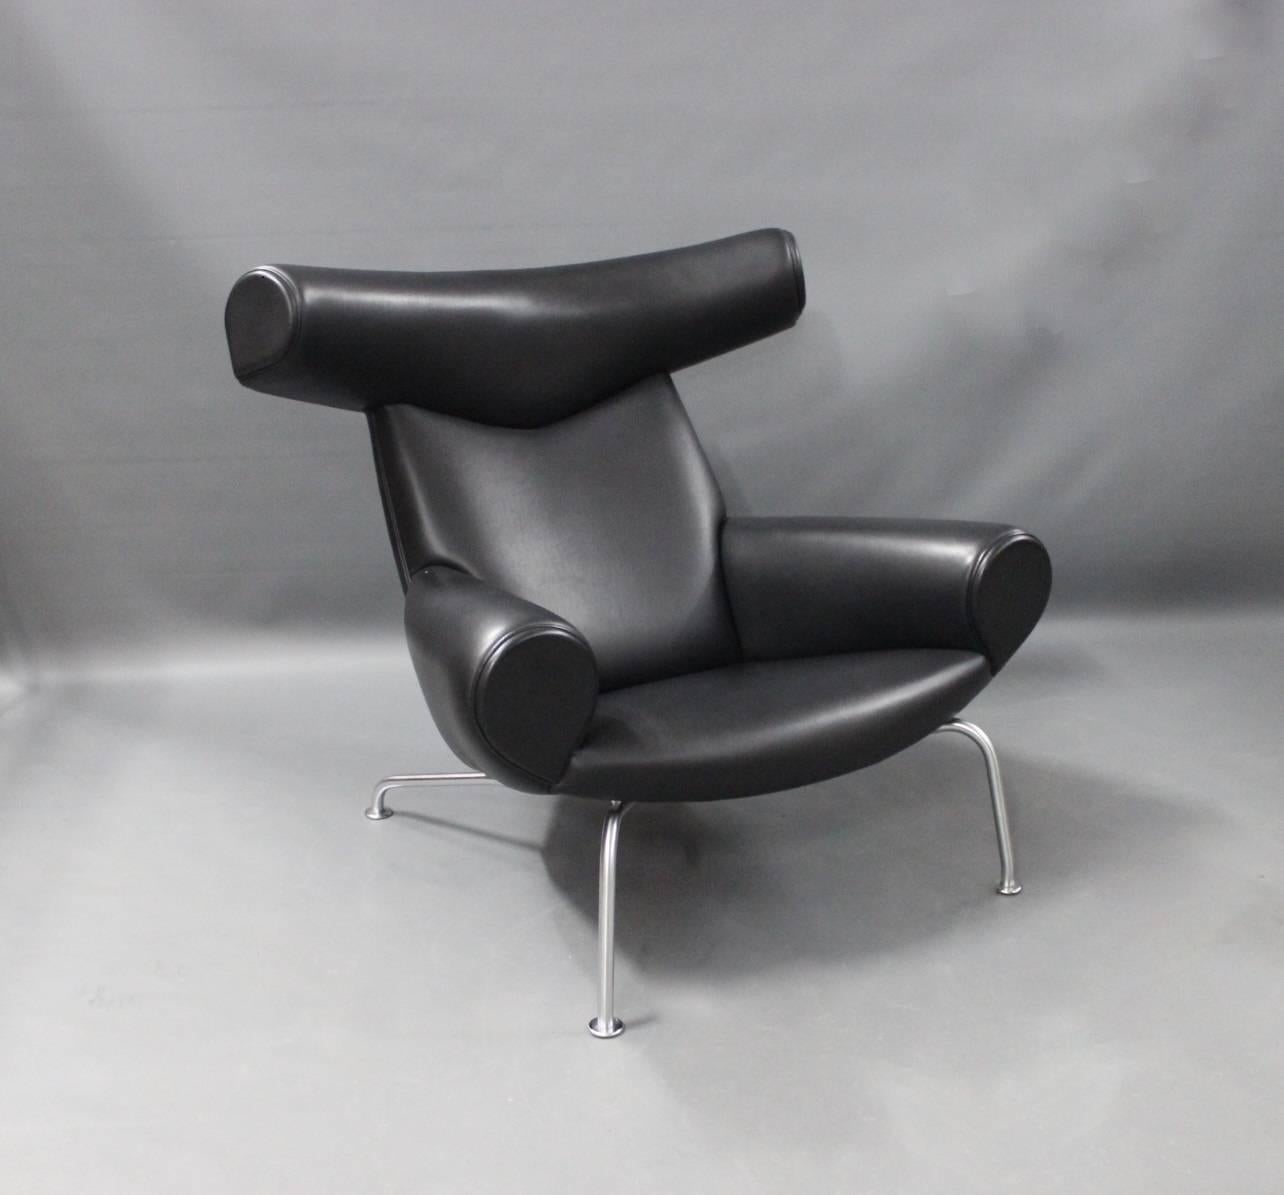 The Ox chair, model EJ 100 and stool model EJ 100-F, upholstered in black leather, designed by Hans J. Wegner in the 1960s and manufactured at Erik Jørgensen furniture factory the 20th of January 2008. The chair and stool can be purchased